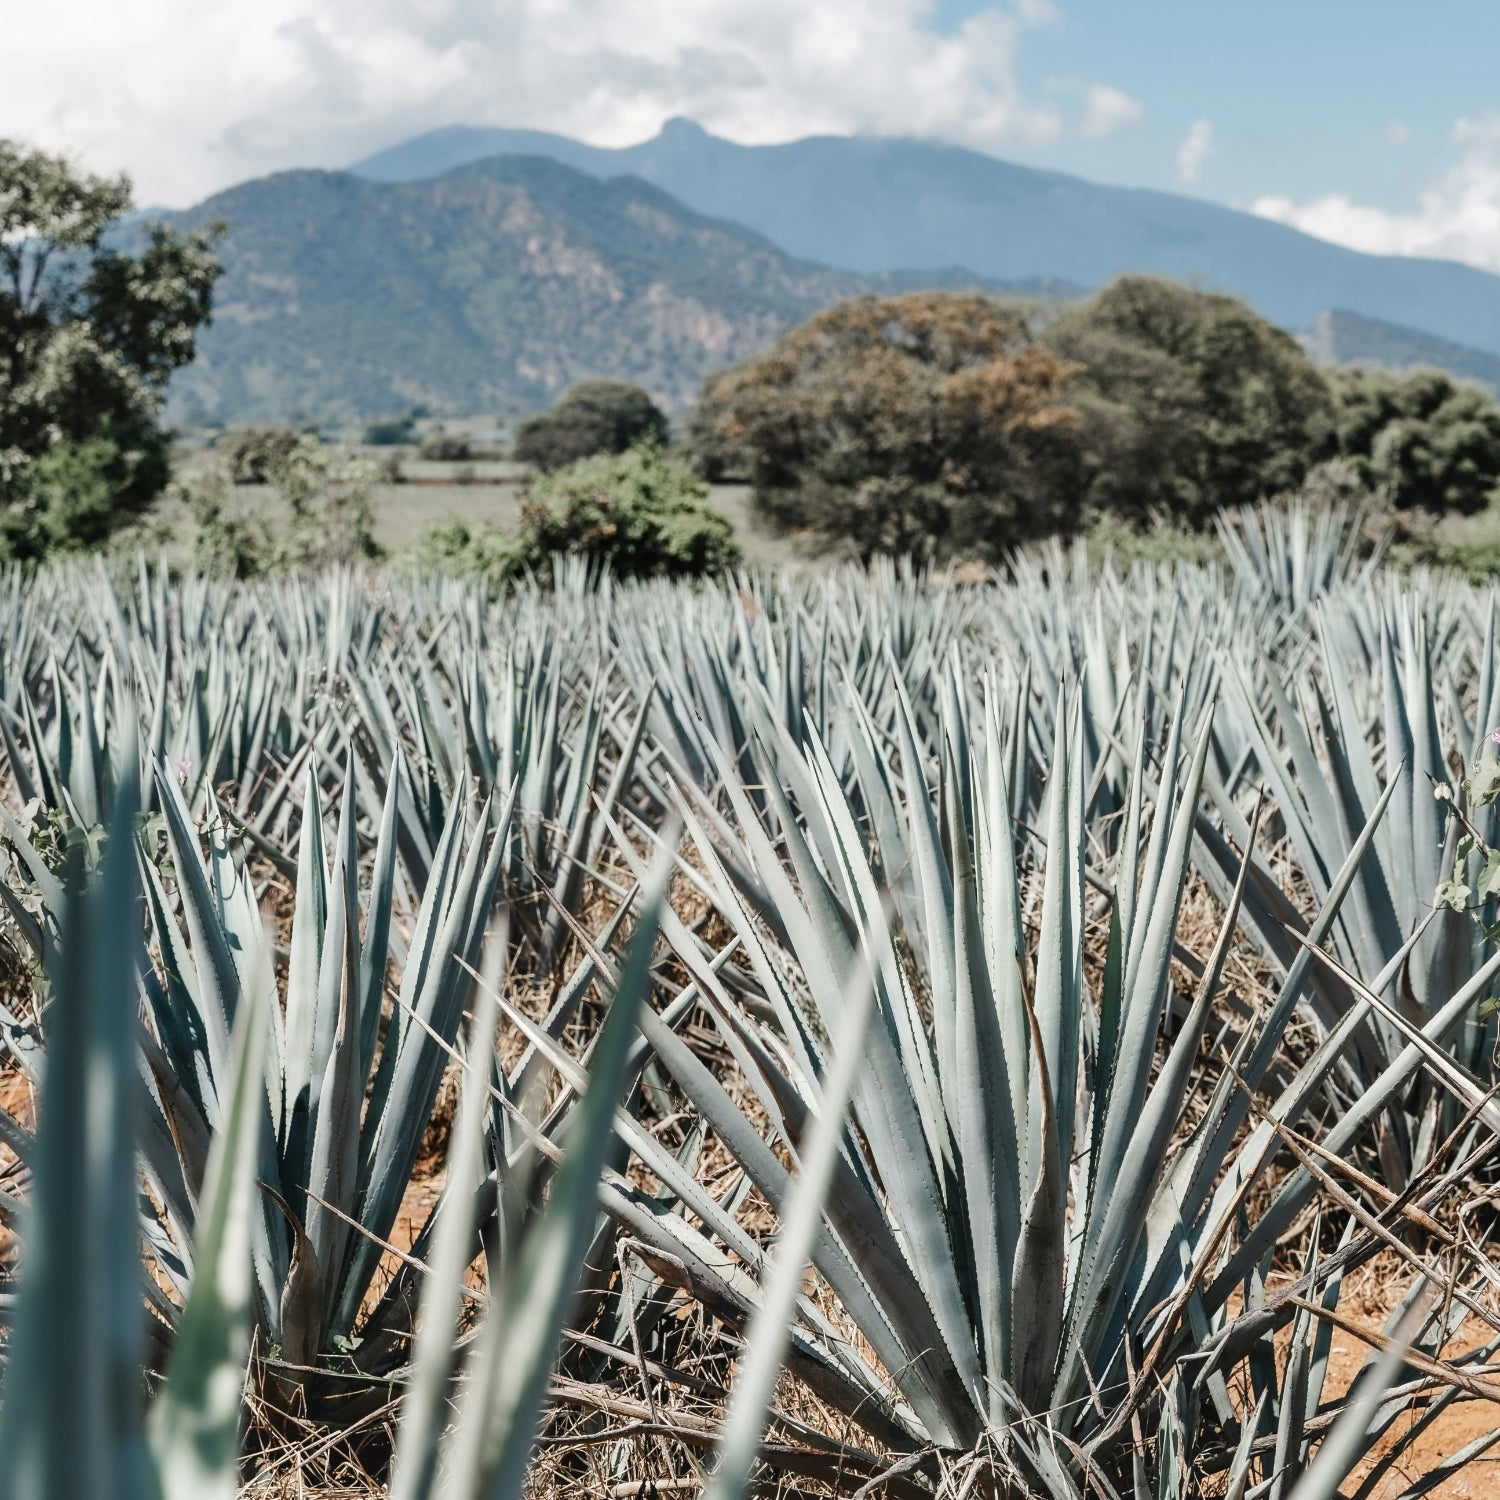 A blue agave field.